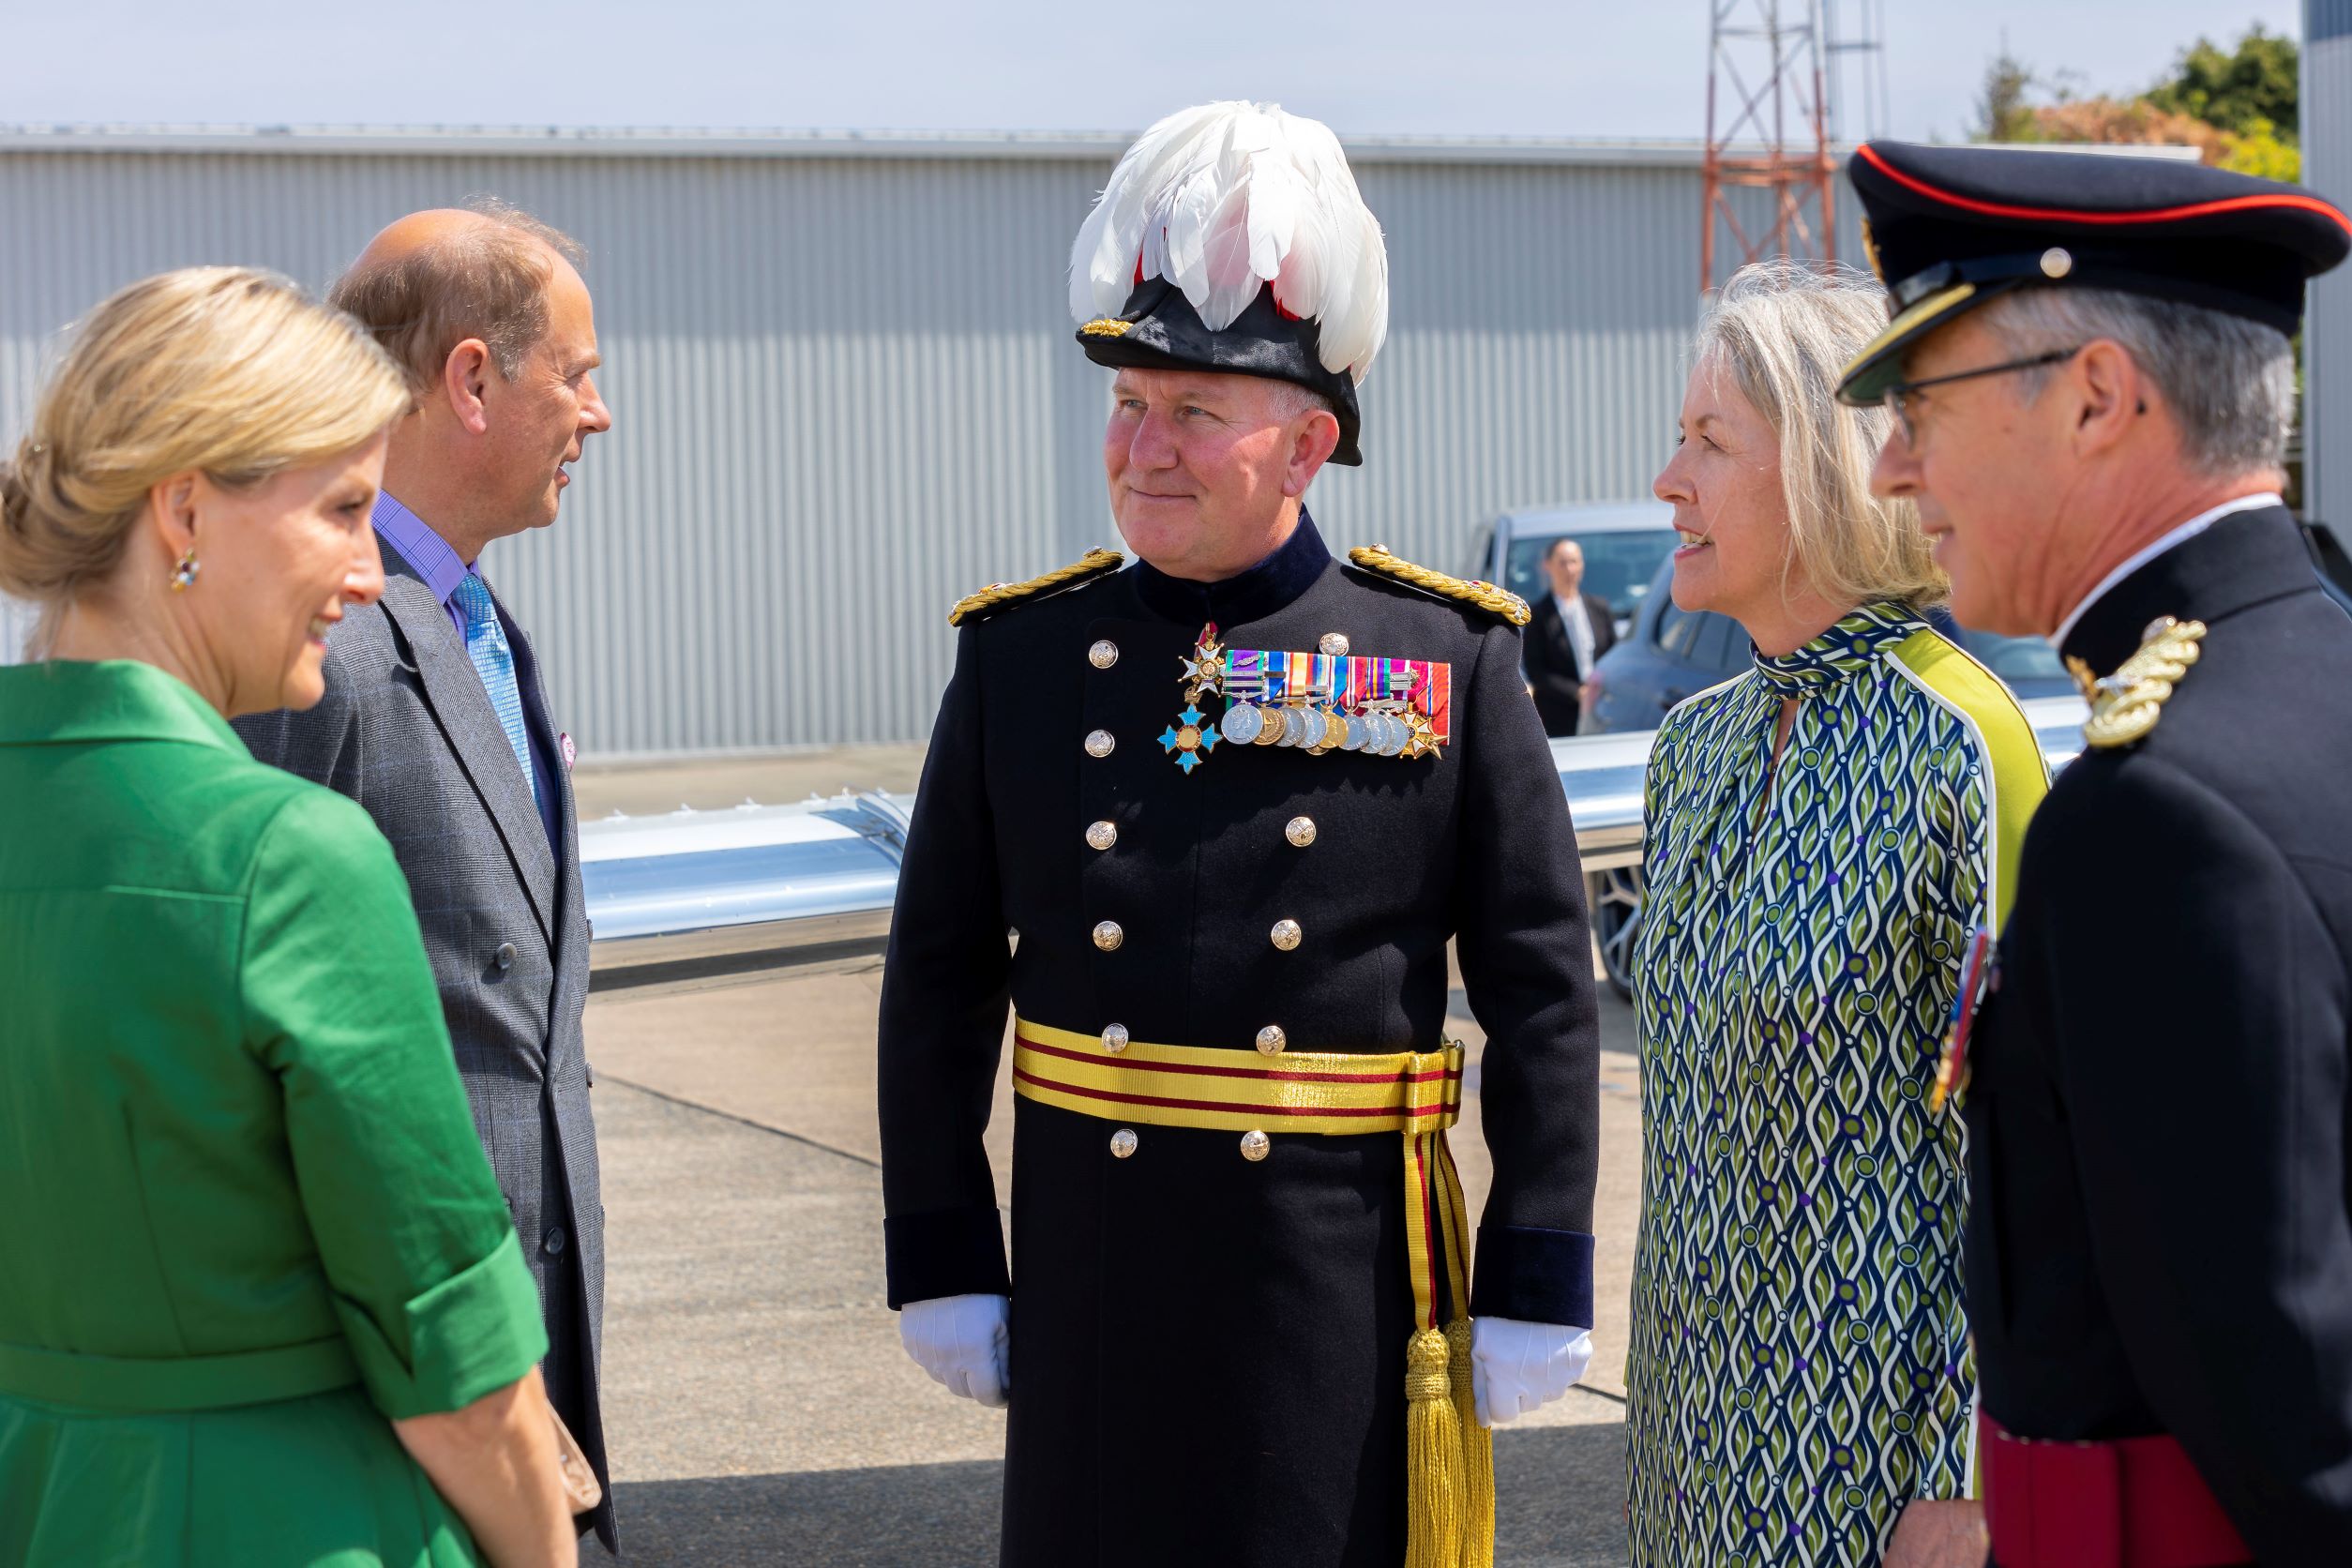 Meeting the Wessex's (now the Duke and Duchess of Edinburgh) Liberation Day, May 9th 2022